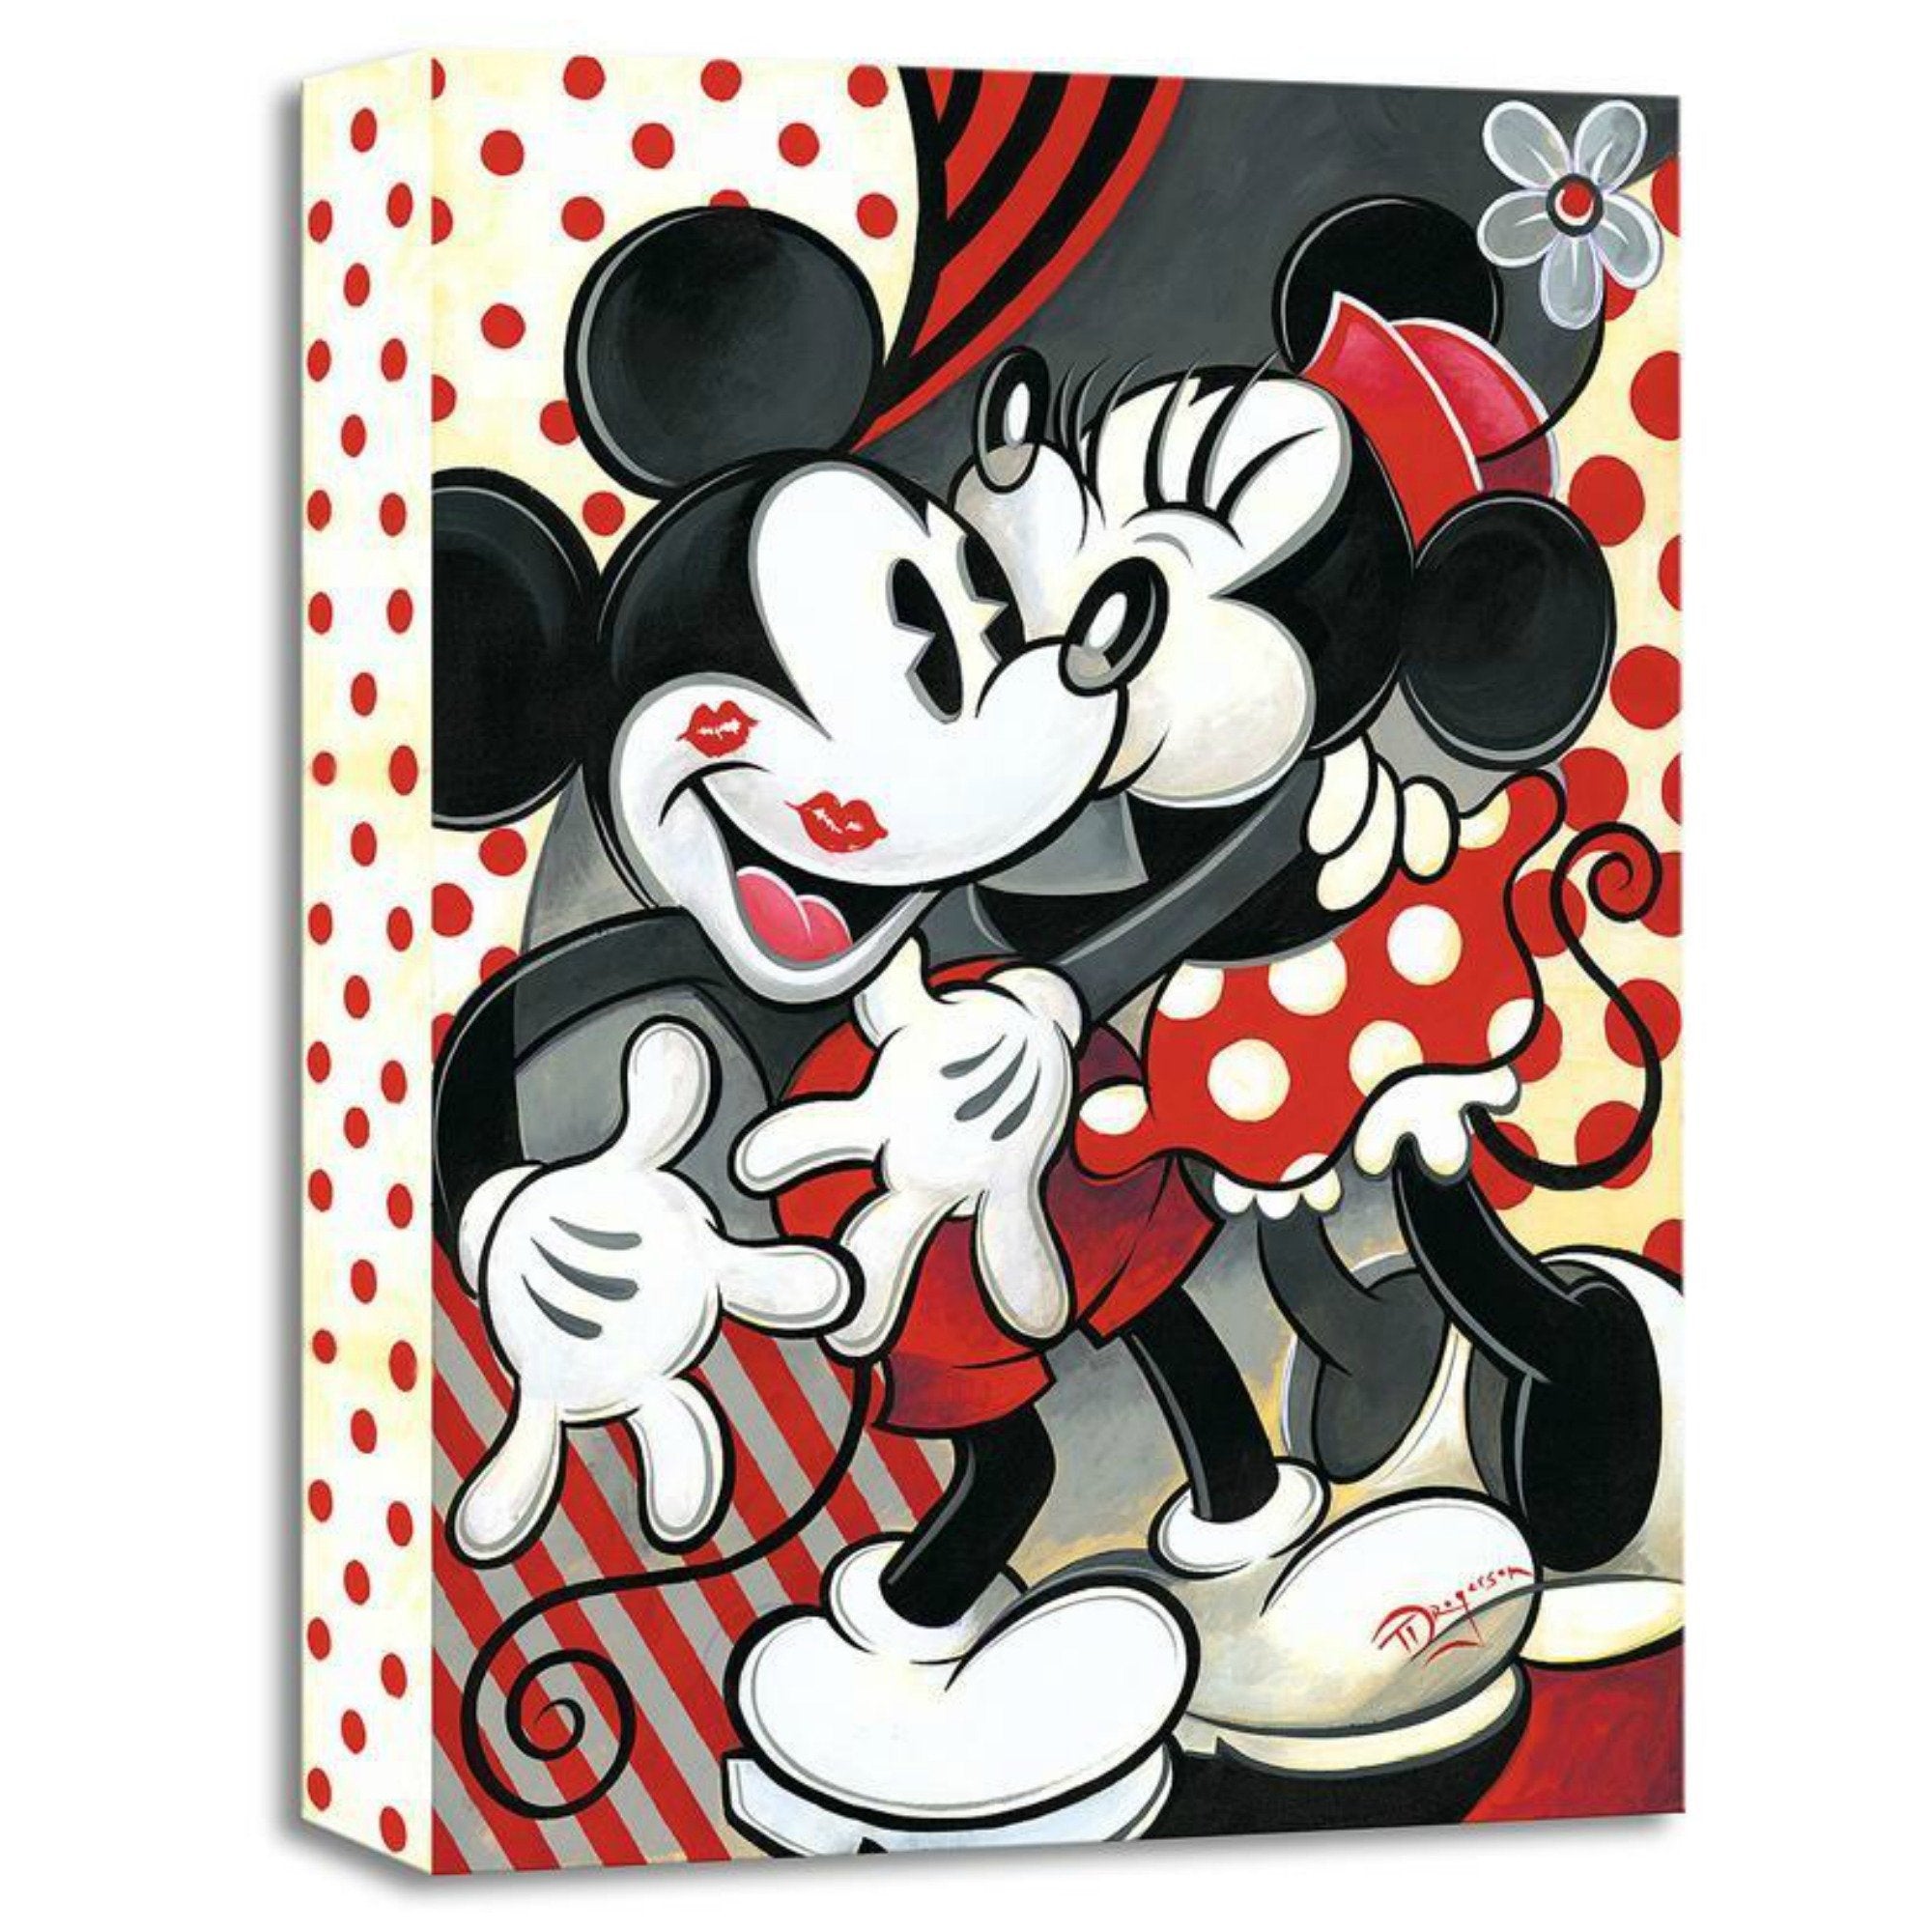 Hugs and Kisses by Tim Rogerson   Minnie giving Mickey hugs and lots of red kisses.